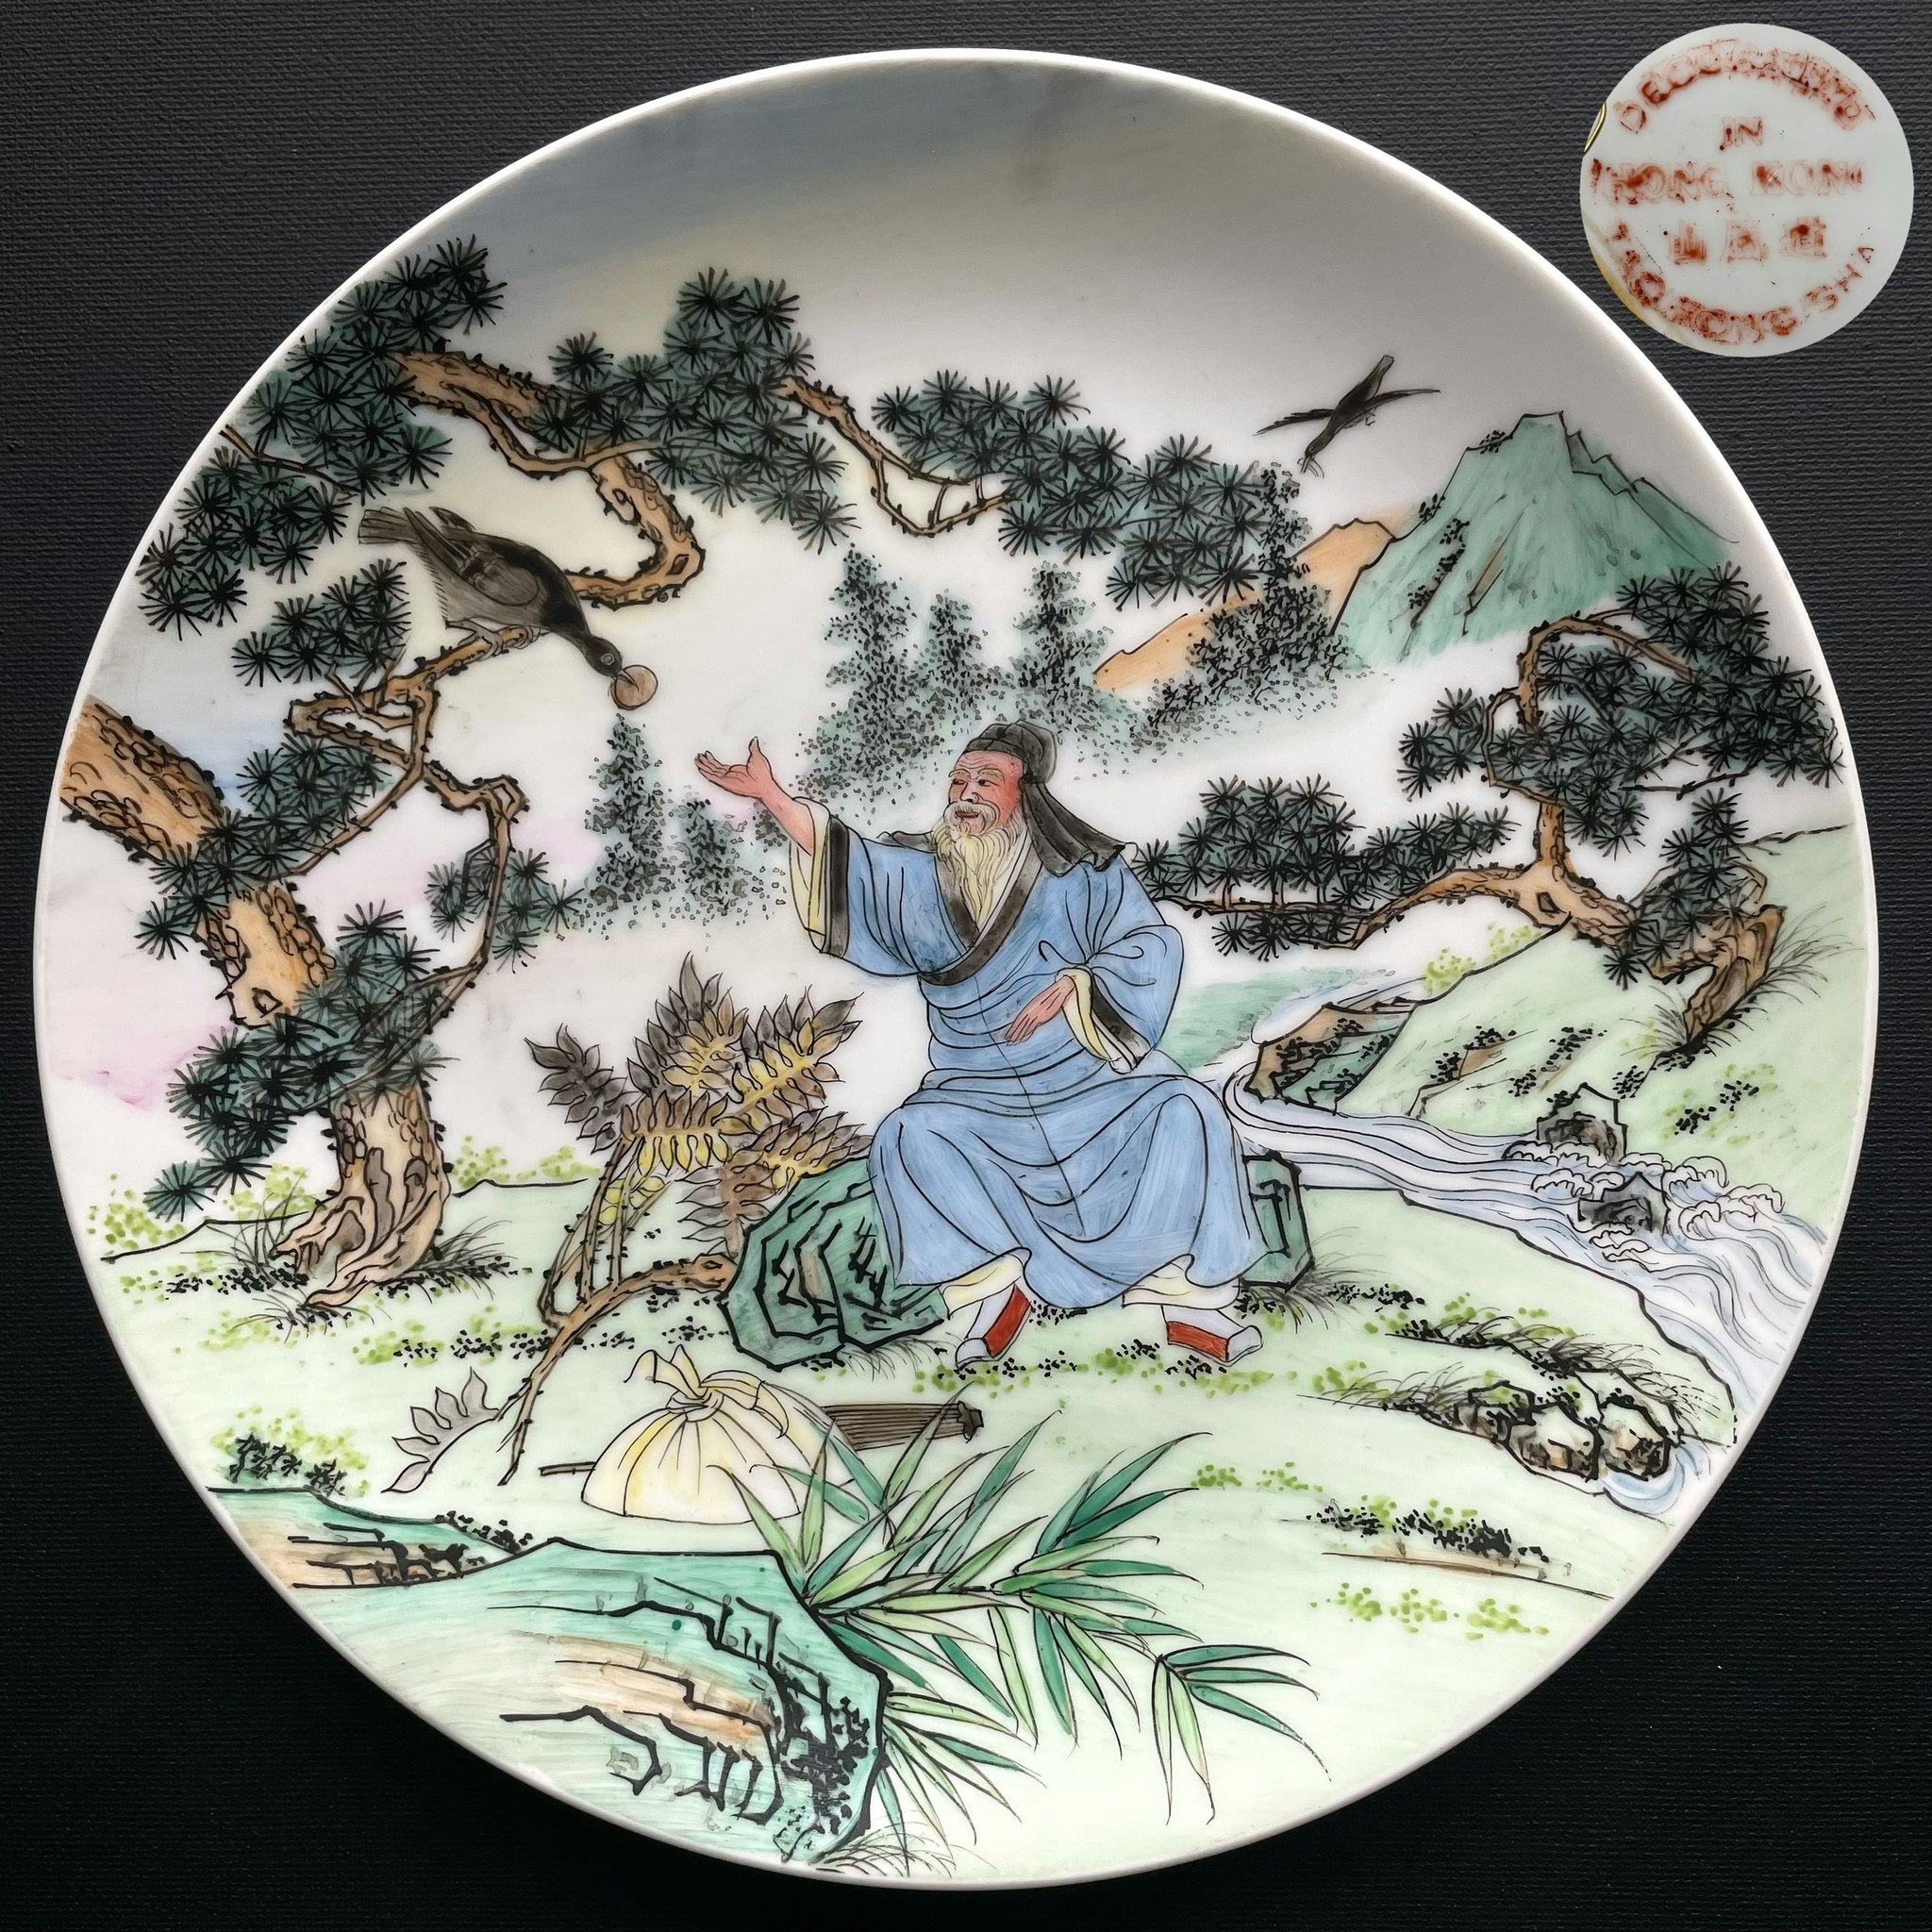 *Reserved for Tony* Vintage plate with bible motif from Tao Fong Shan 道风山 Hong Kong #1265